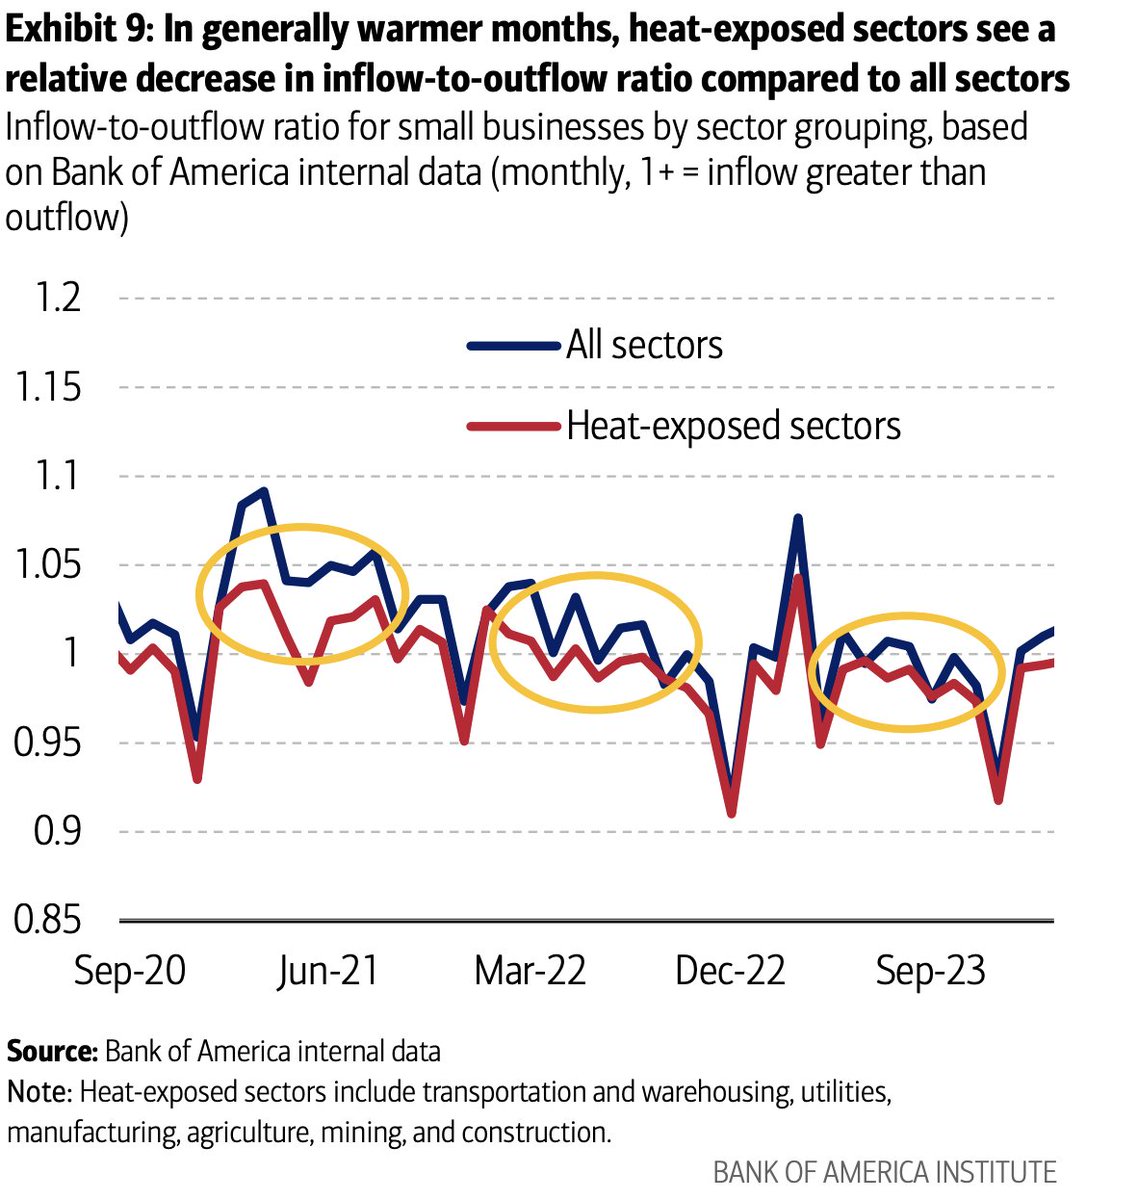 Interesting analysis from Bank of America shows that businesses in heat-exposed industries have lower net income during the summer than others, and over the past two years it's been negative. institute.bankofamerica.com/content/dam/ba…